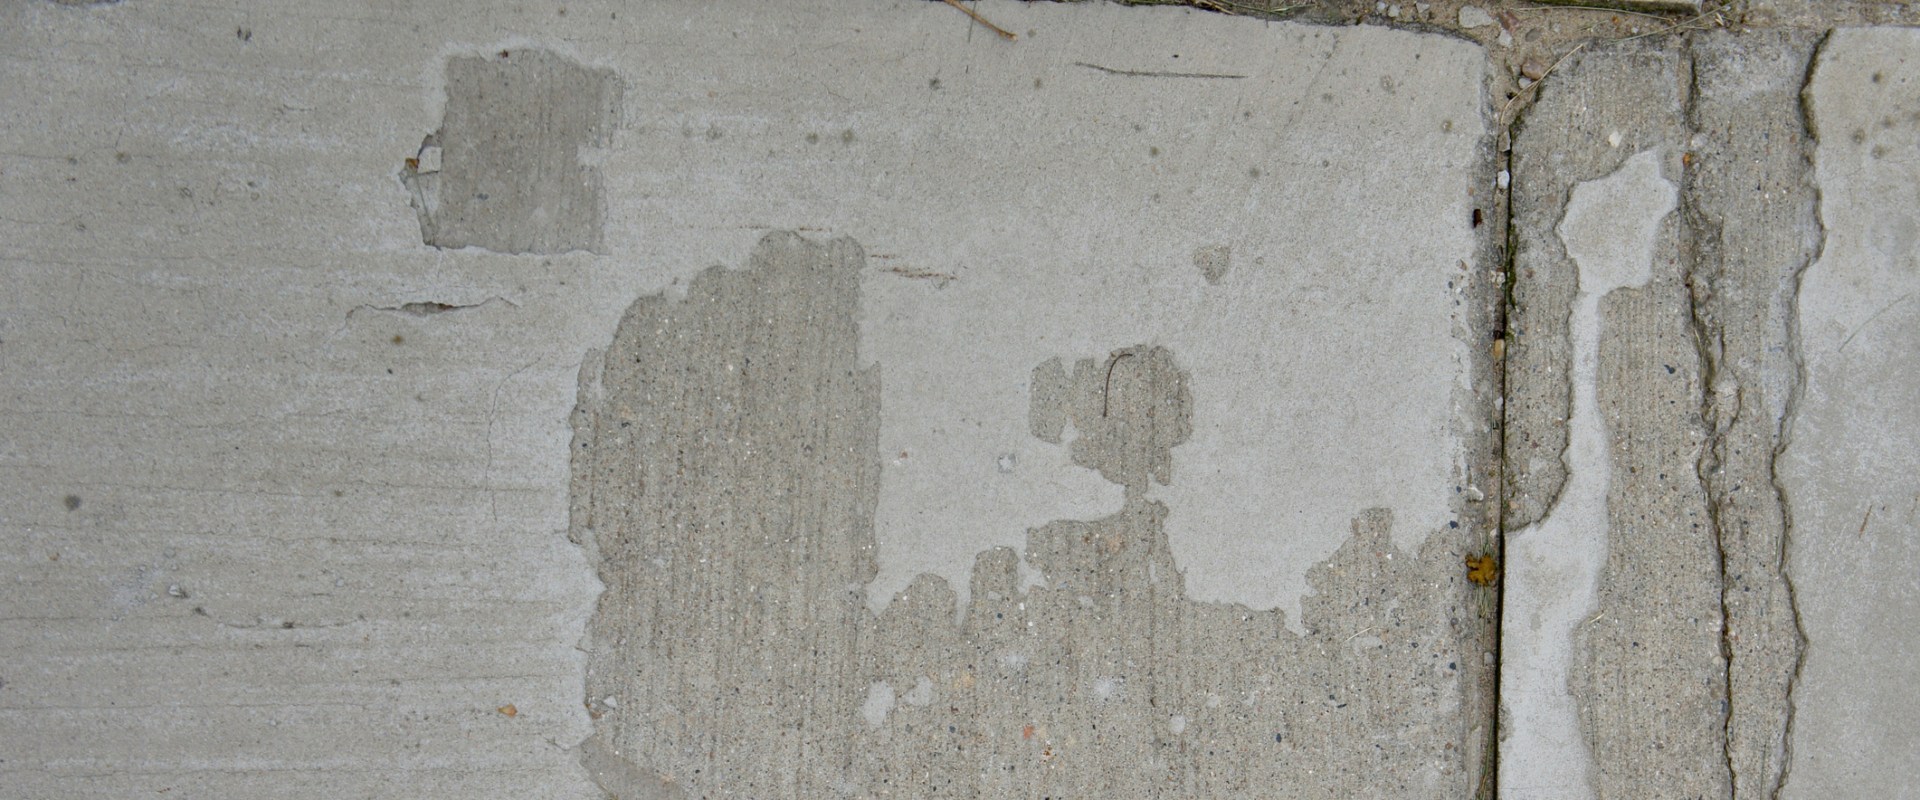 How can we prevent the flaking of concrete?